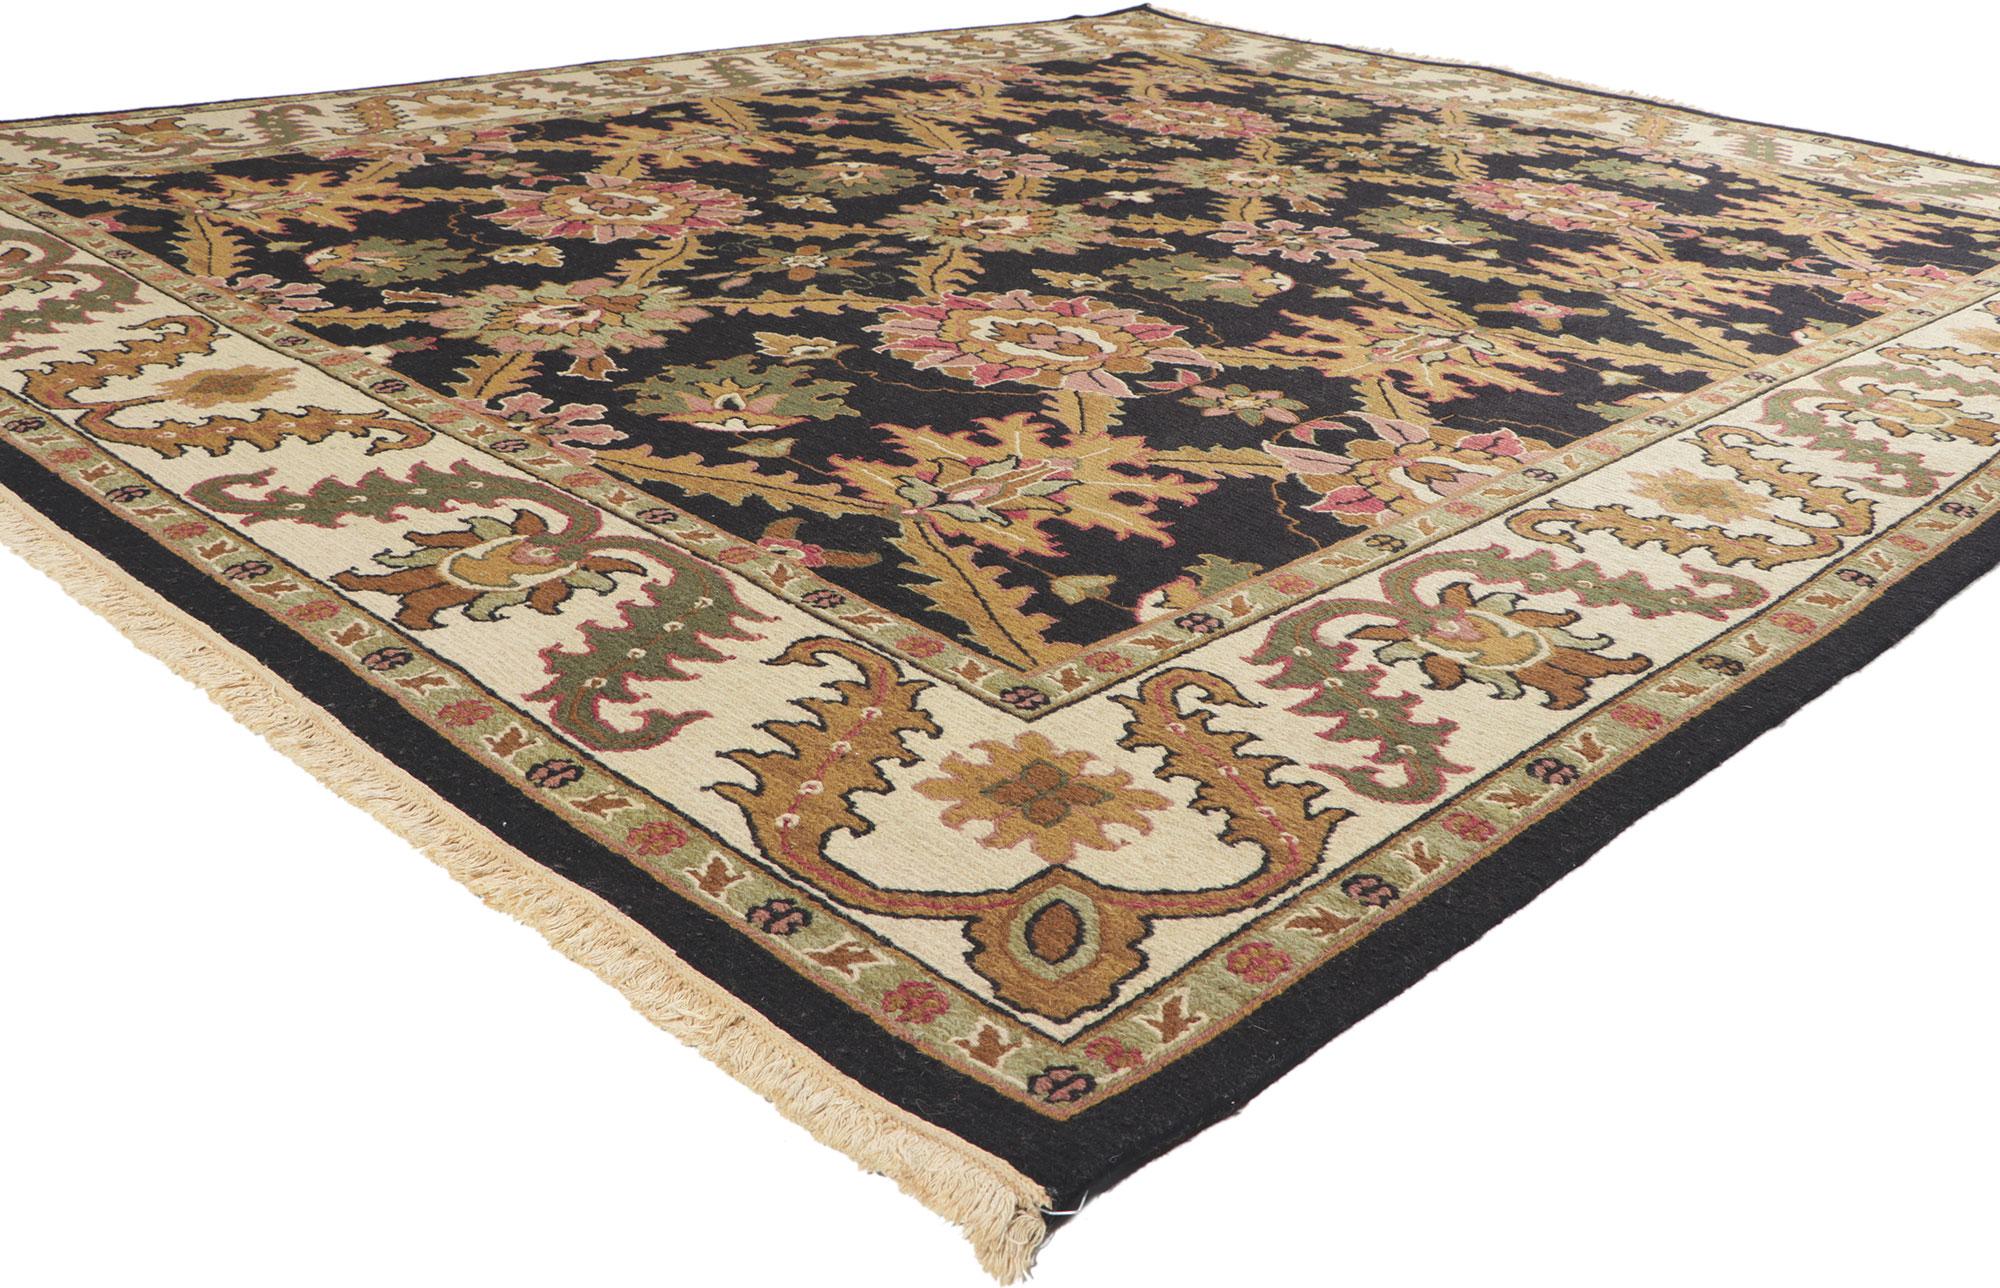 74739 Vintage Persian Sultanabad Indian Rug, 08'01 X 09'10. 
Emanating timeless style with incredible detail and texture, this hand knotted wool vintage Indian rug is a captivating vision of woven beauty. The intricate Persian Sultanabad design and